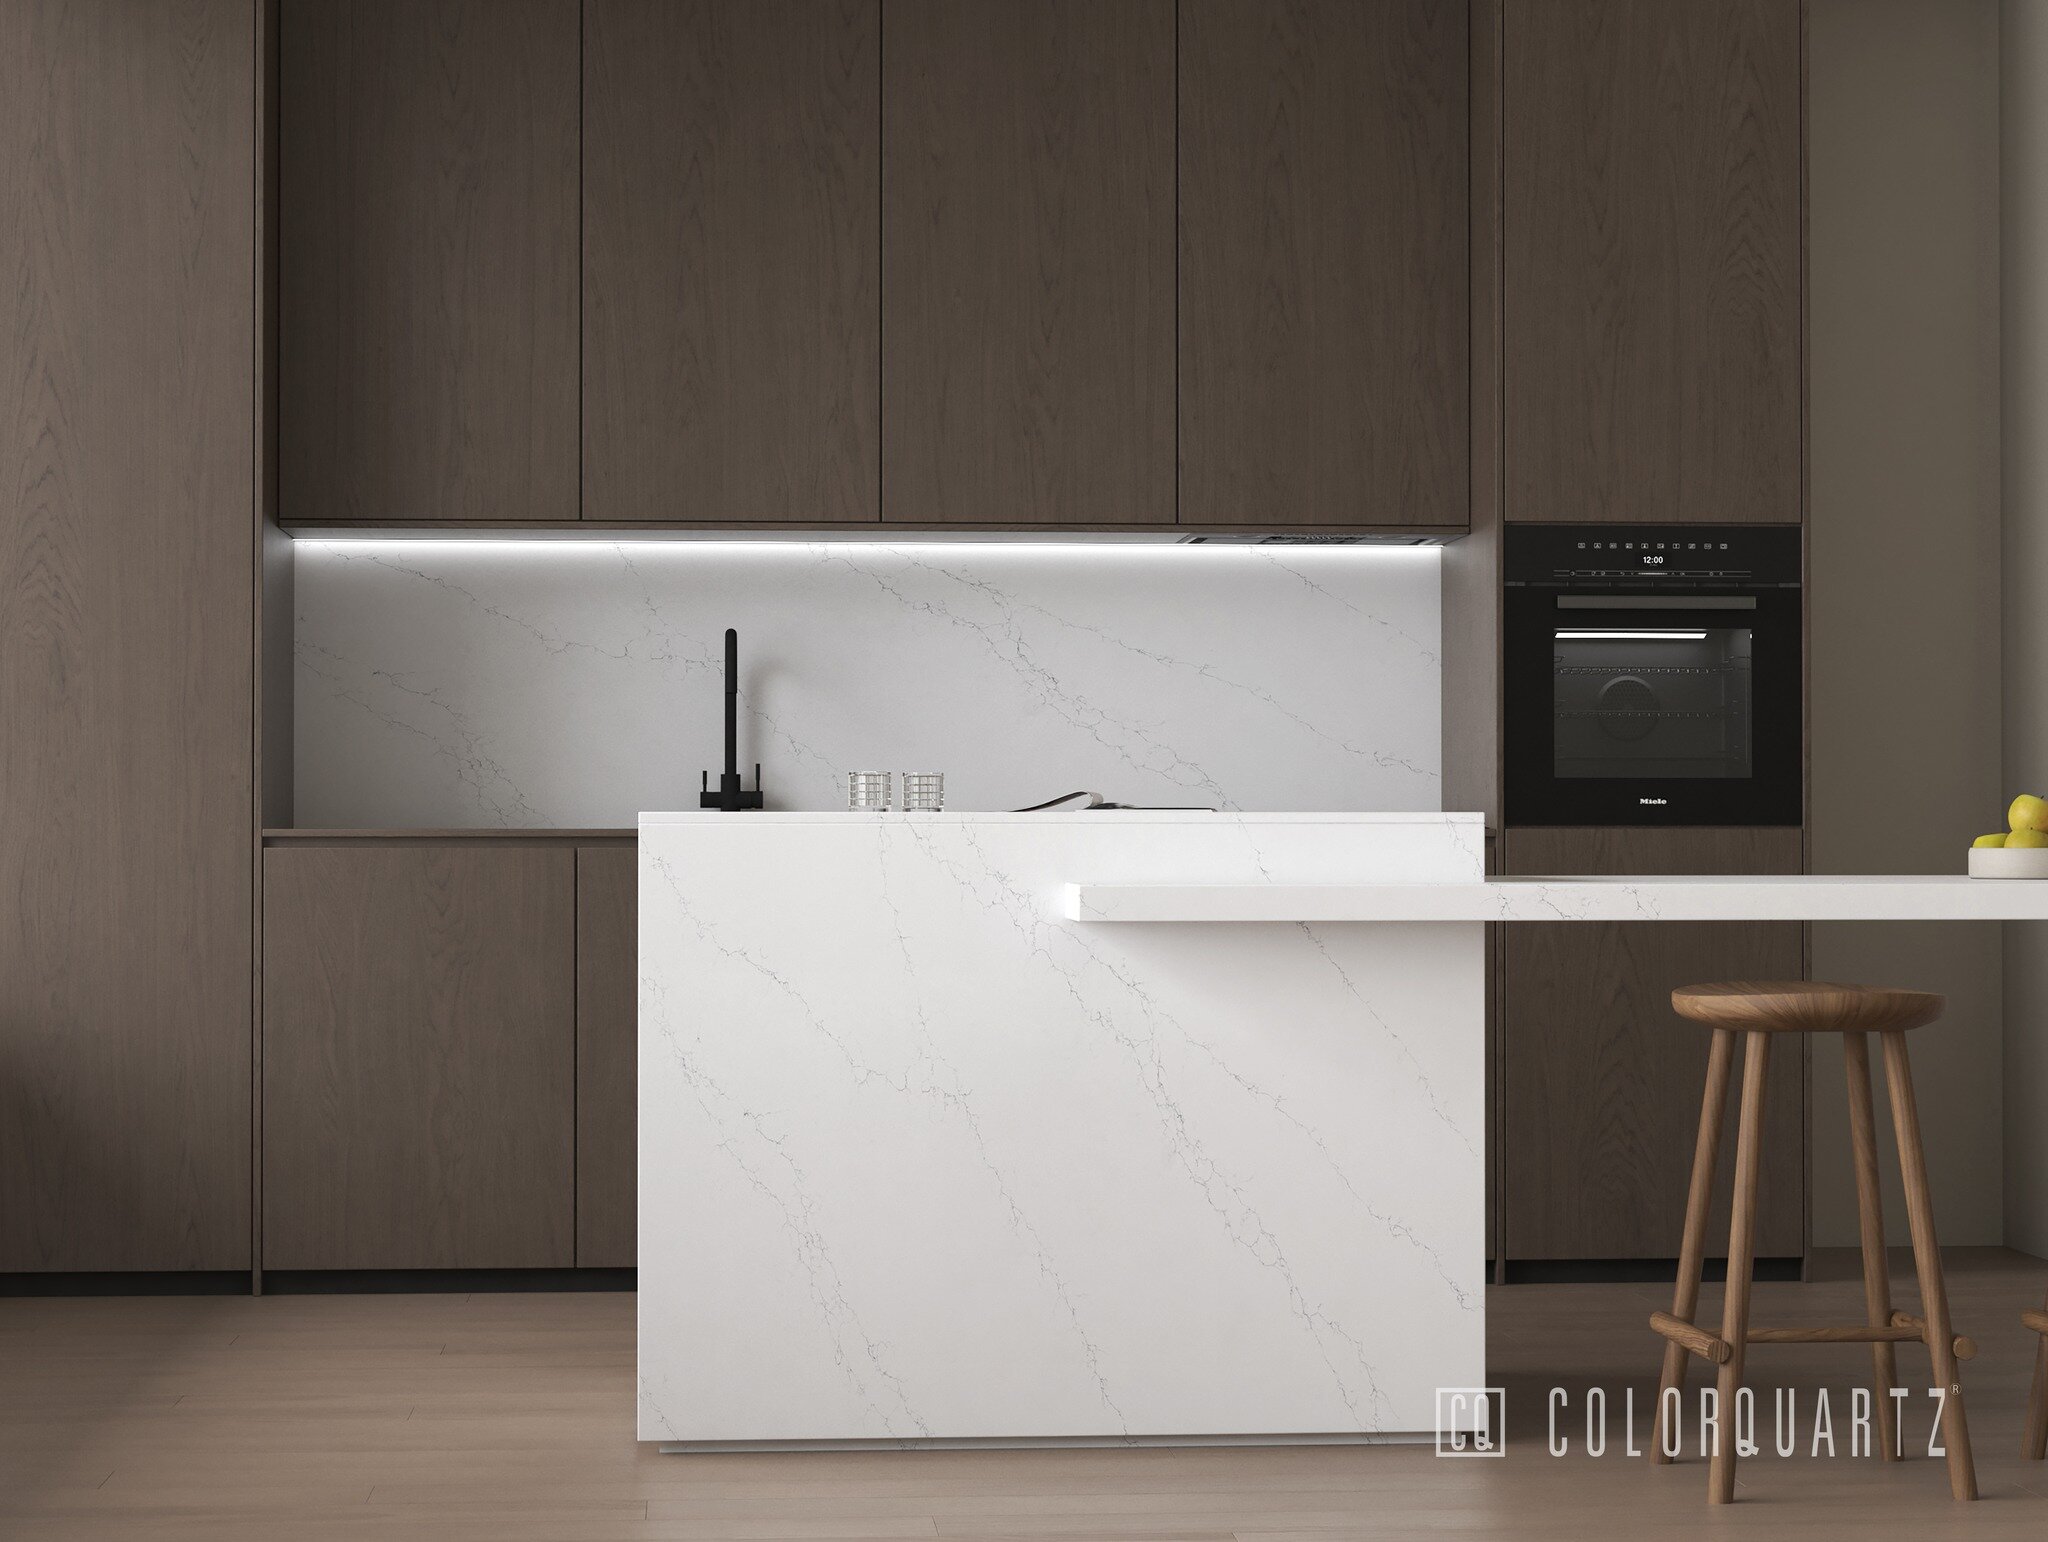 The epitome of sophistication, CQ984 Calacatta Nimbus is a true showstopper.

Discover now: http://colorquartz.com

#Colorquartz #CQ #CQ984 #CalacattaNimbus #homedecorating #kitchen #interiors #kitchenremodel #kitchengoals #kitchendesign #interiordes